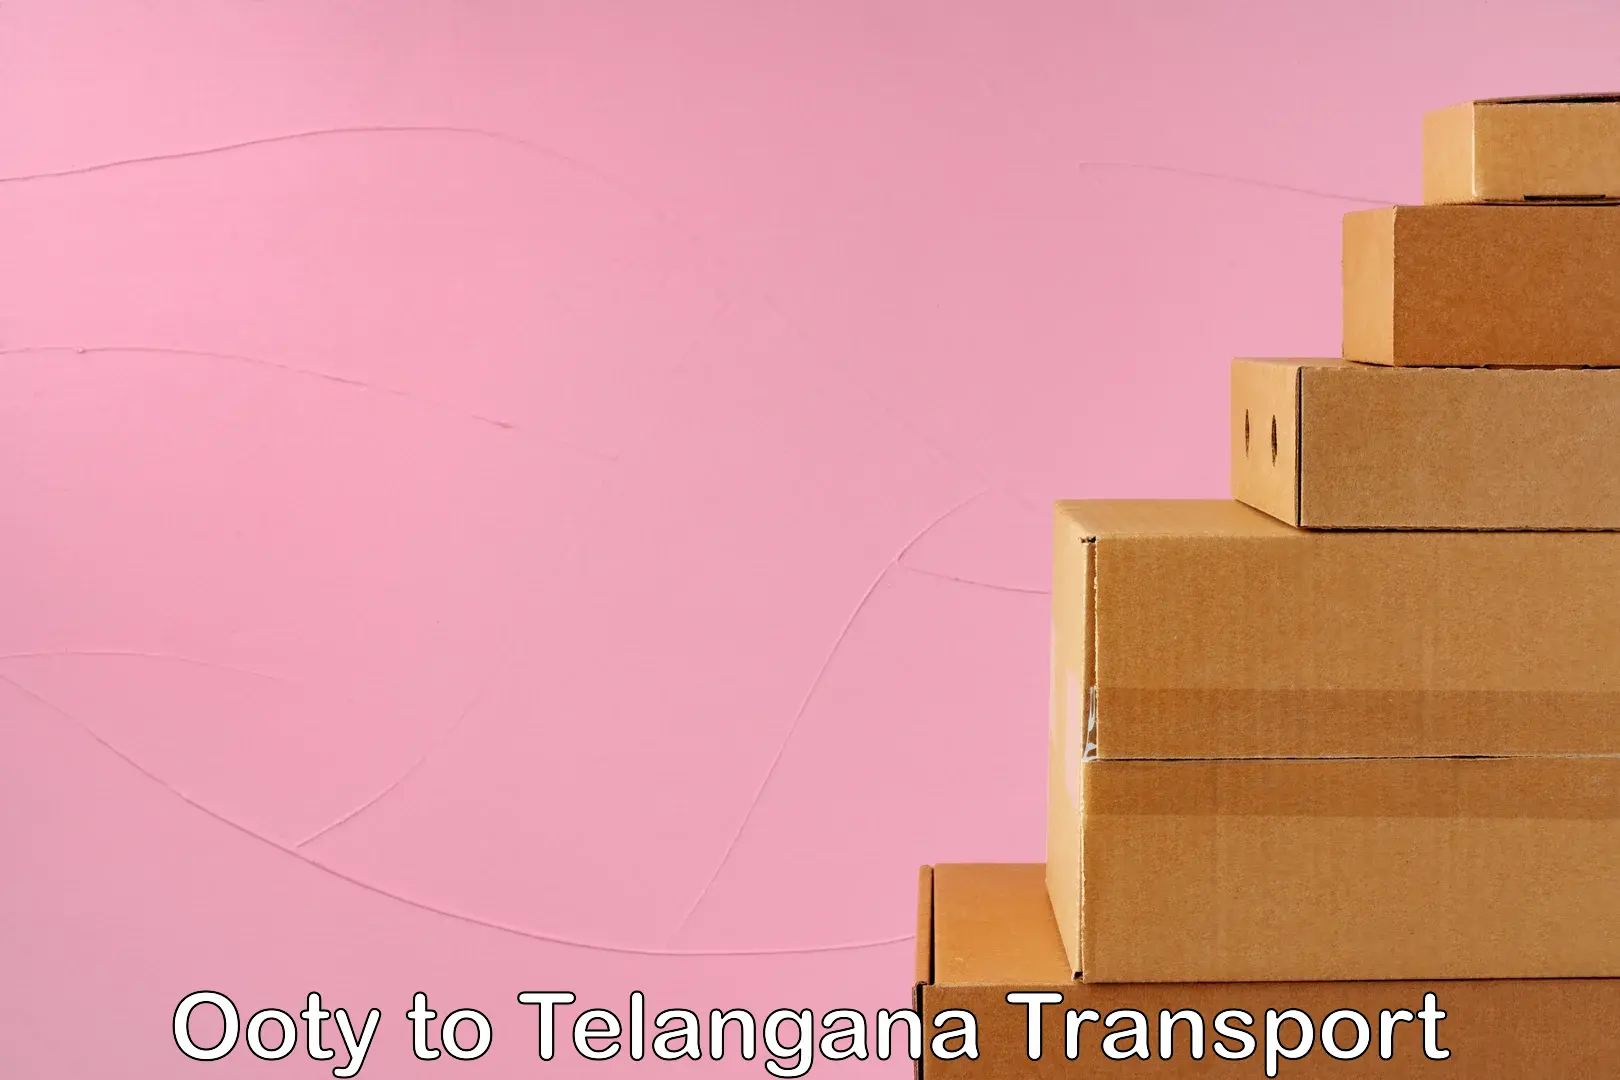 Cycle transportation service Ooty to Telangana